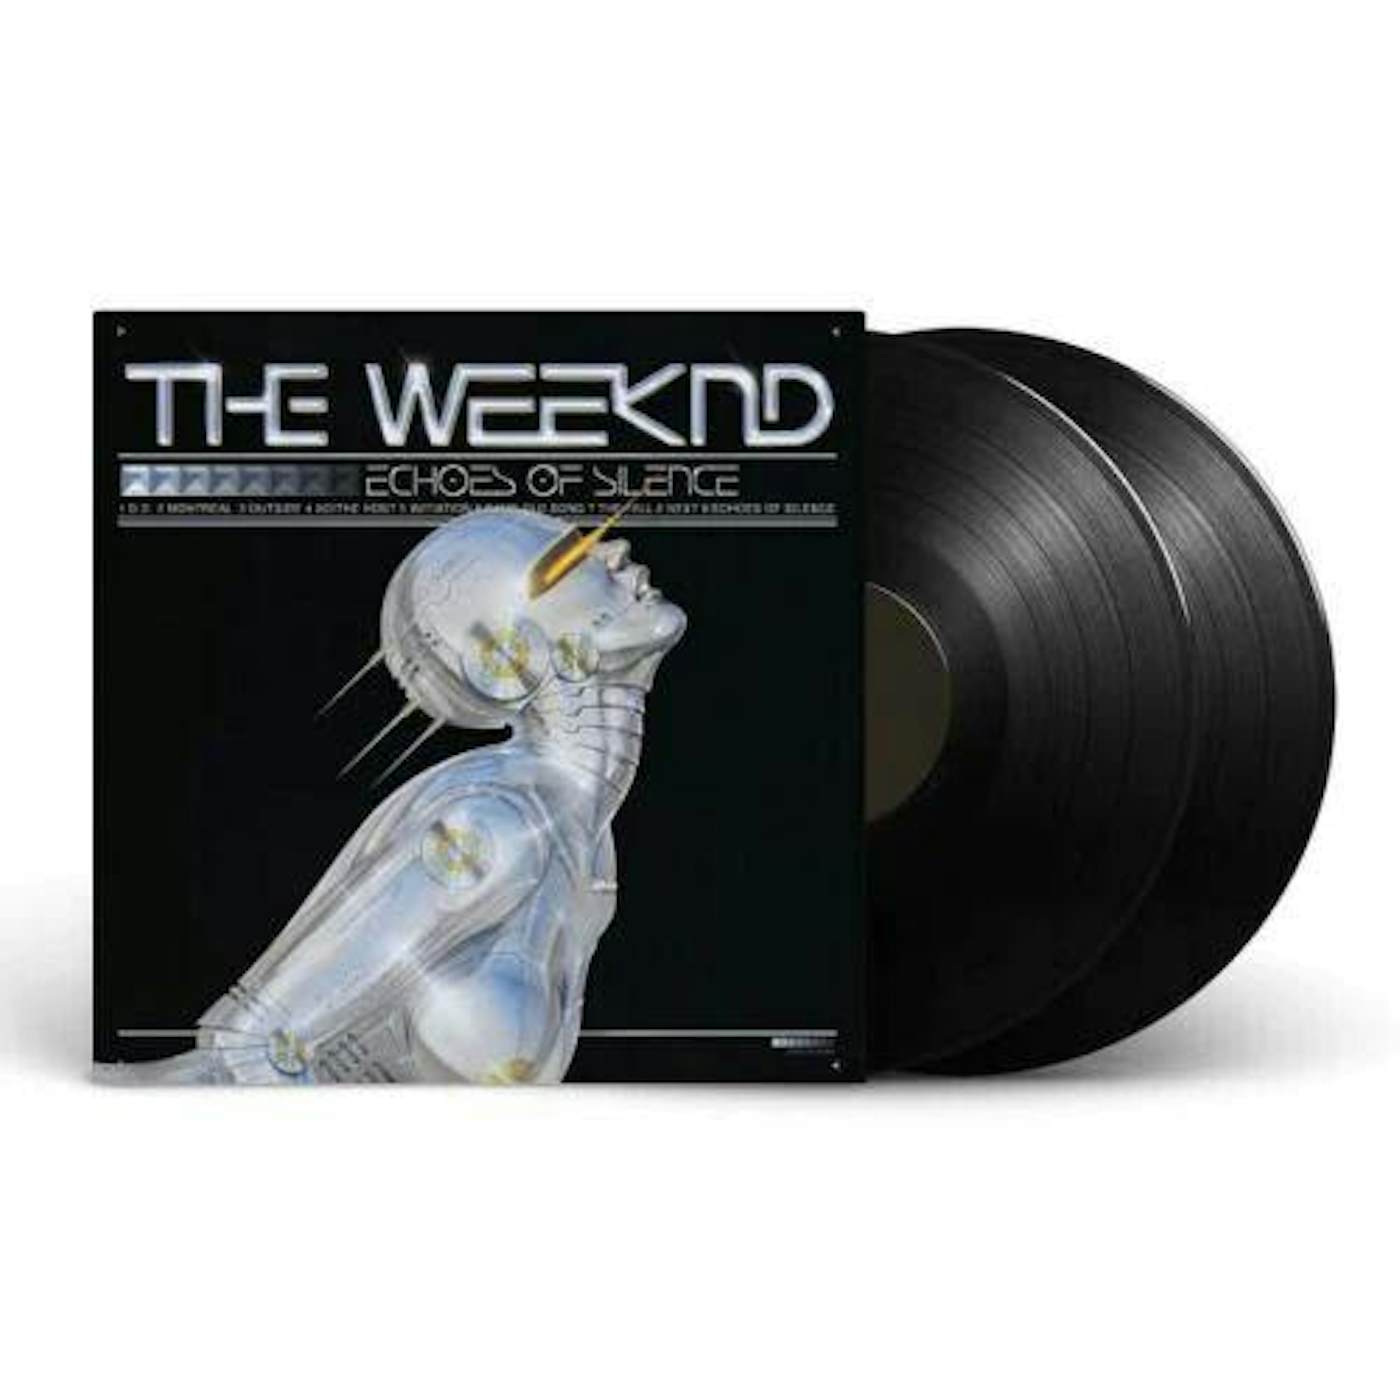 The Weeknd Echoes Of Silence (Alternate Cover Vinyl Record/2LP)